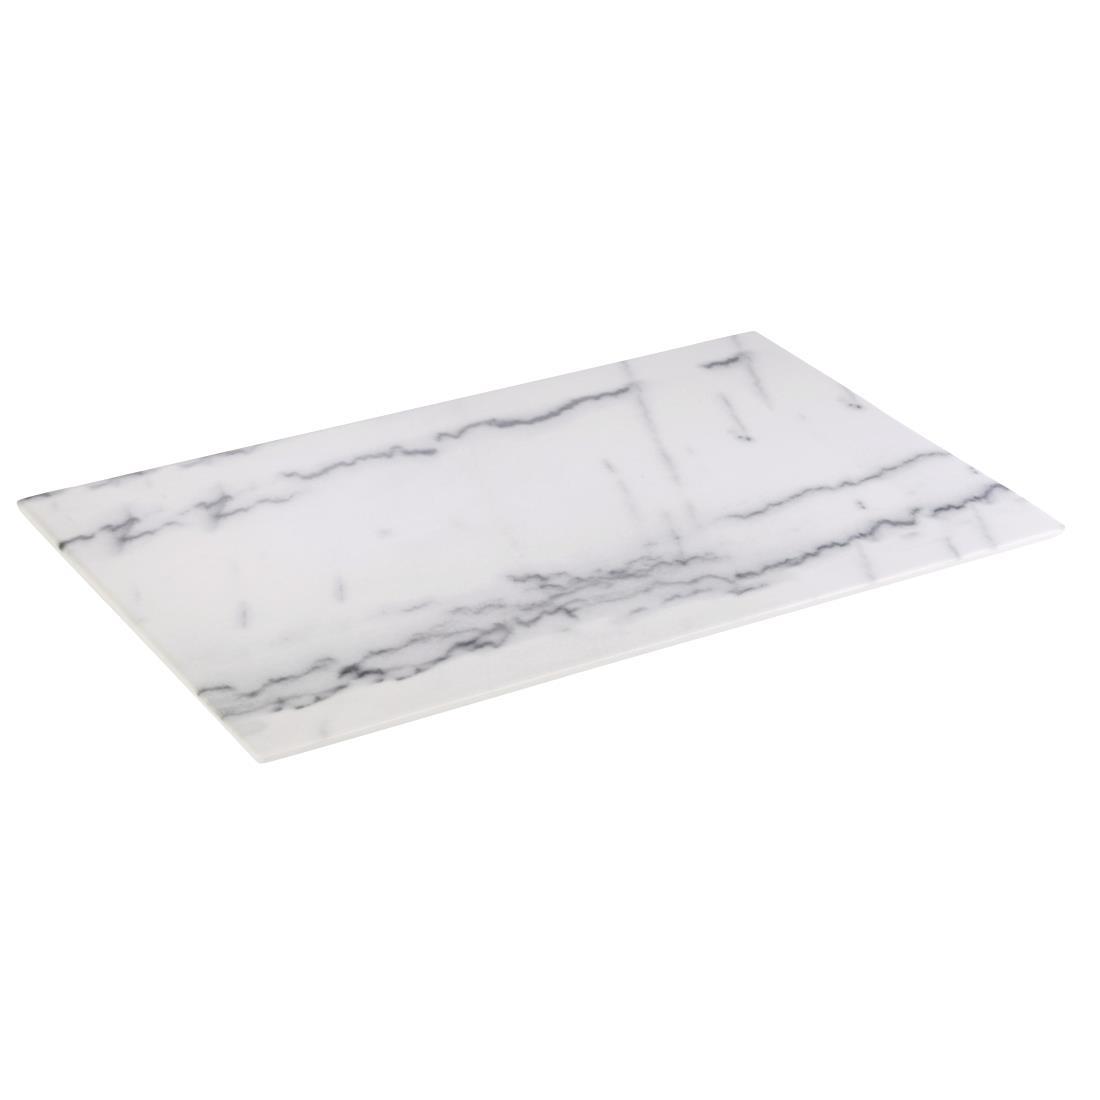 APS Melamine Tray Marble GN 1/1 - HC752  - 1